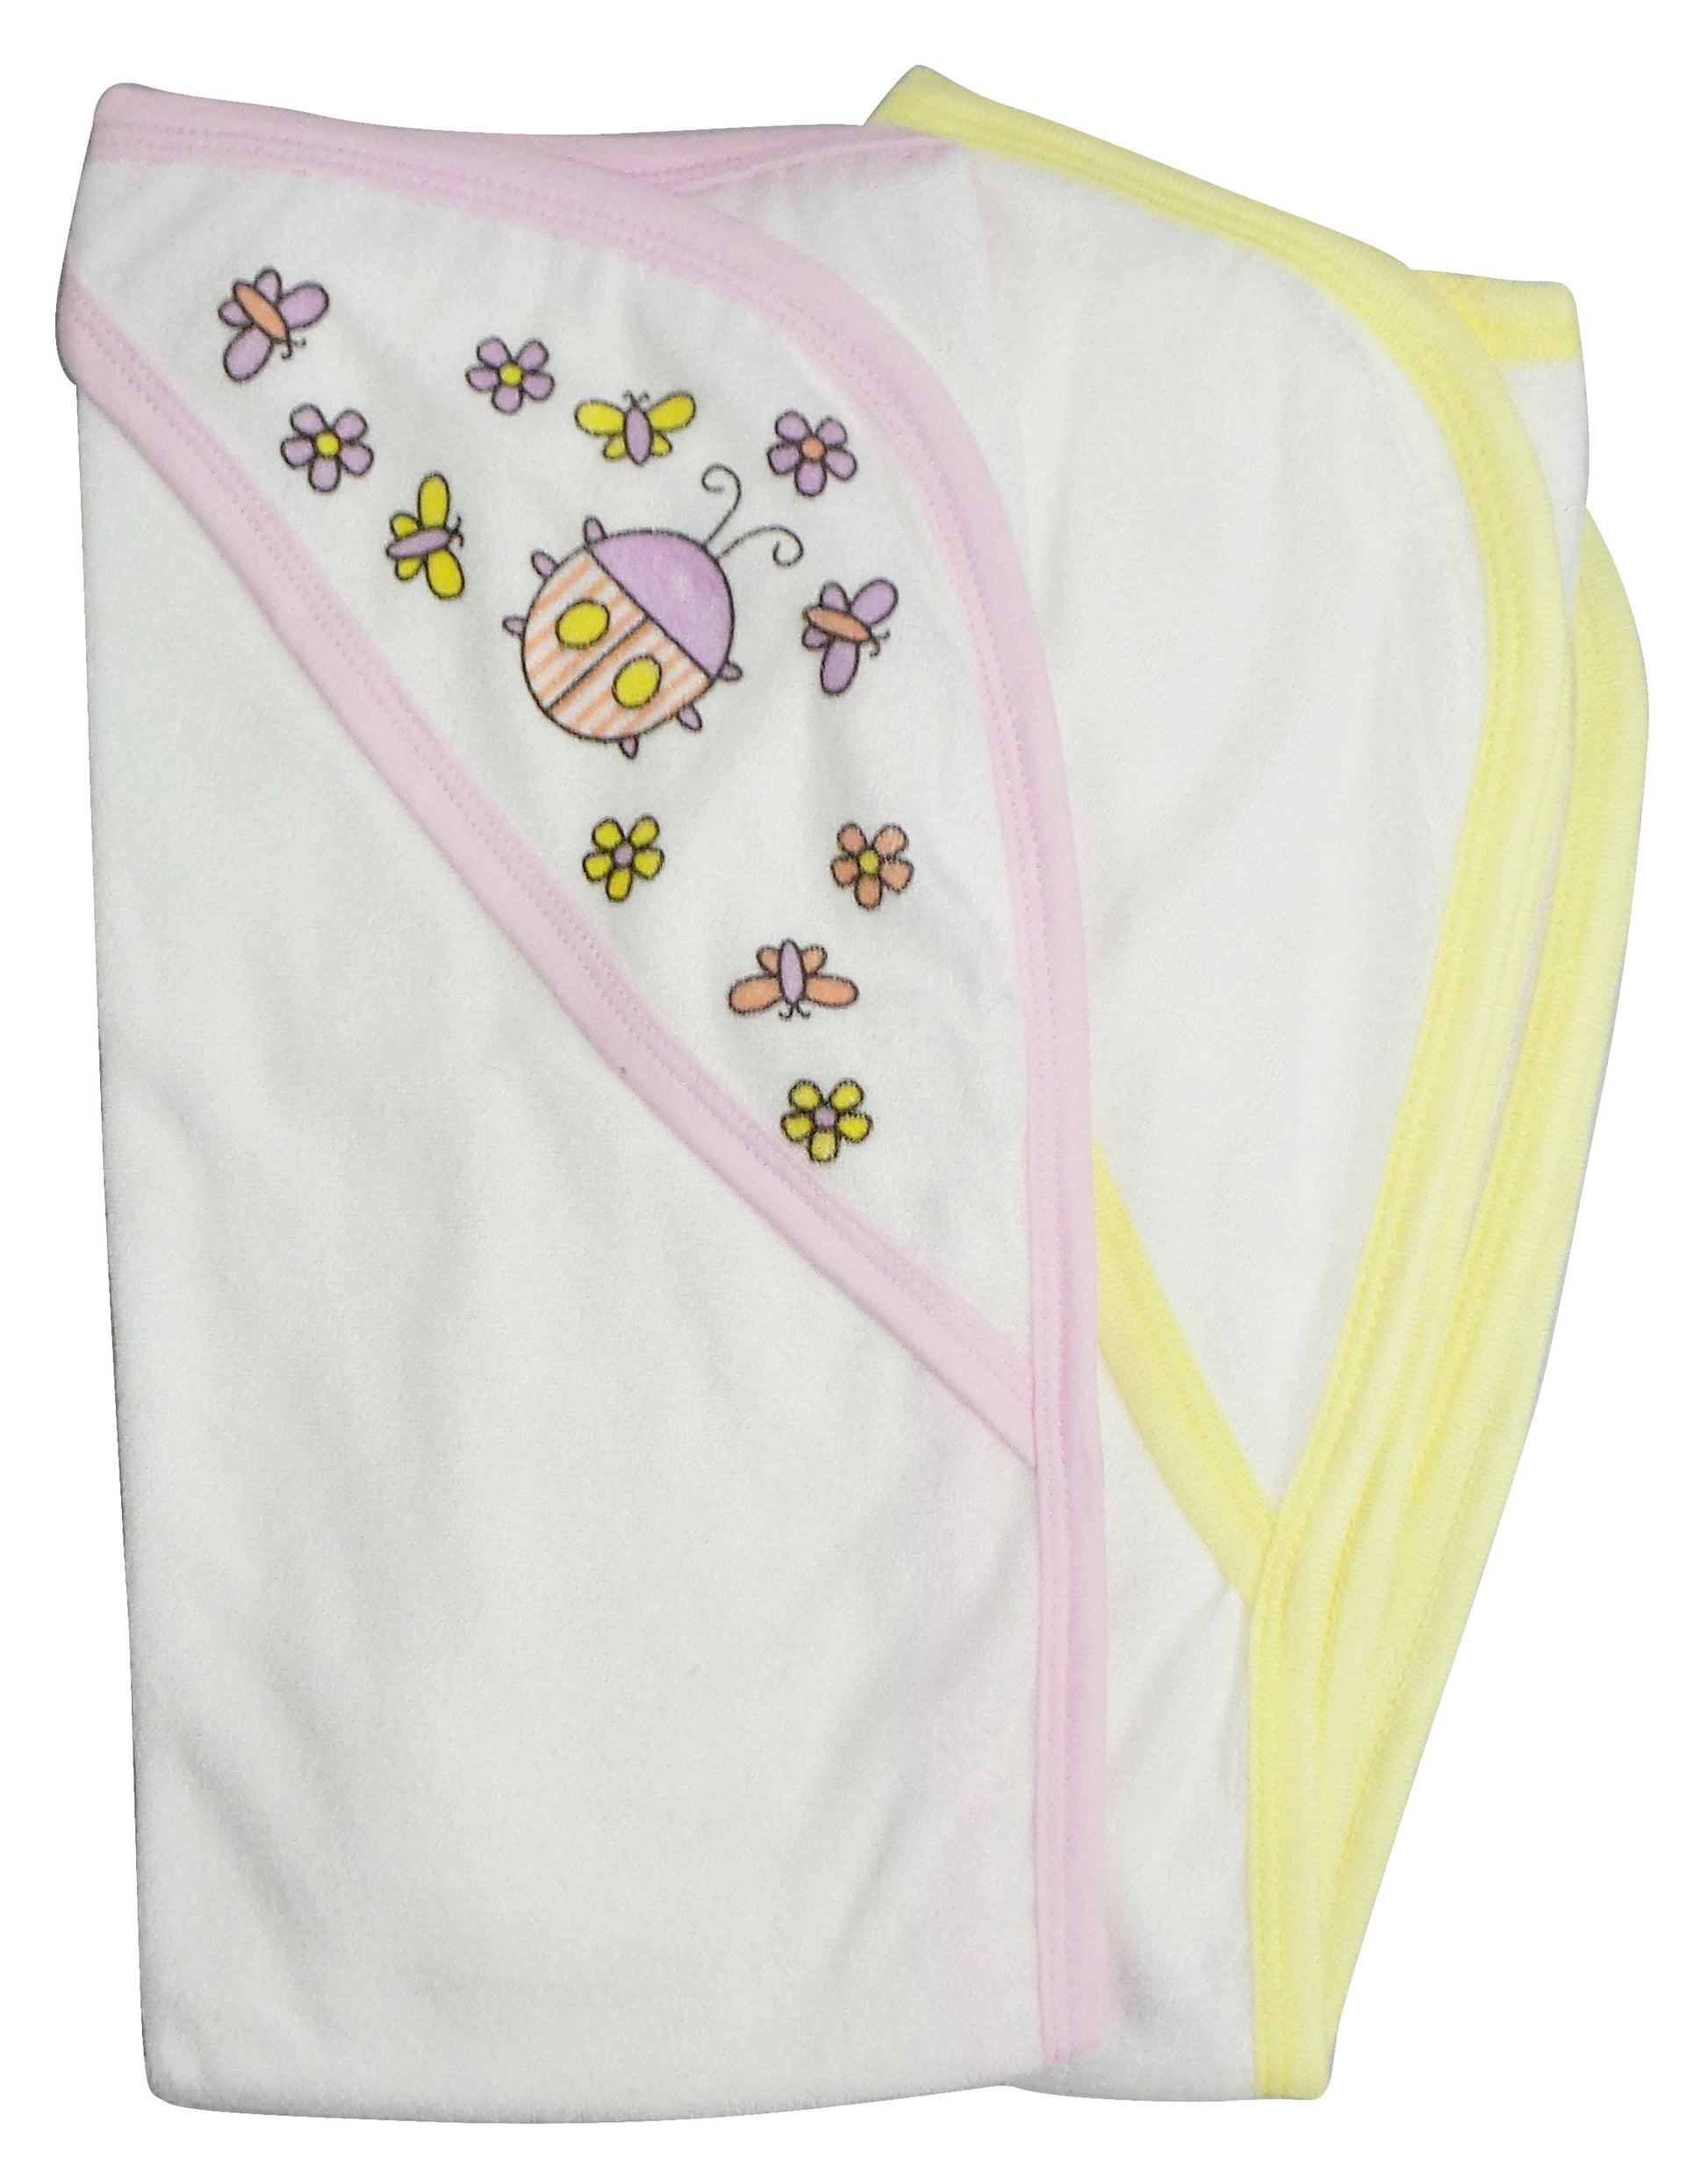 Infant Hooded Bath Towel (Pack of 2) 021-Pink-021B-Yellow